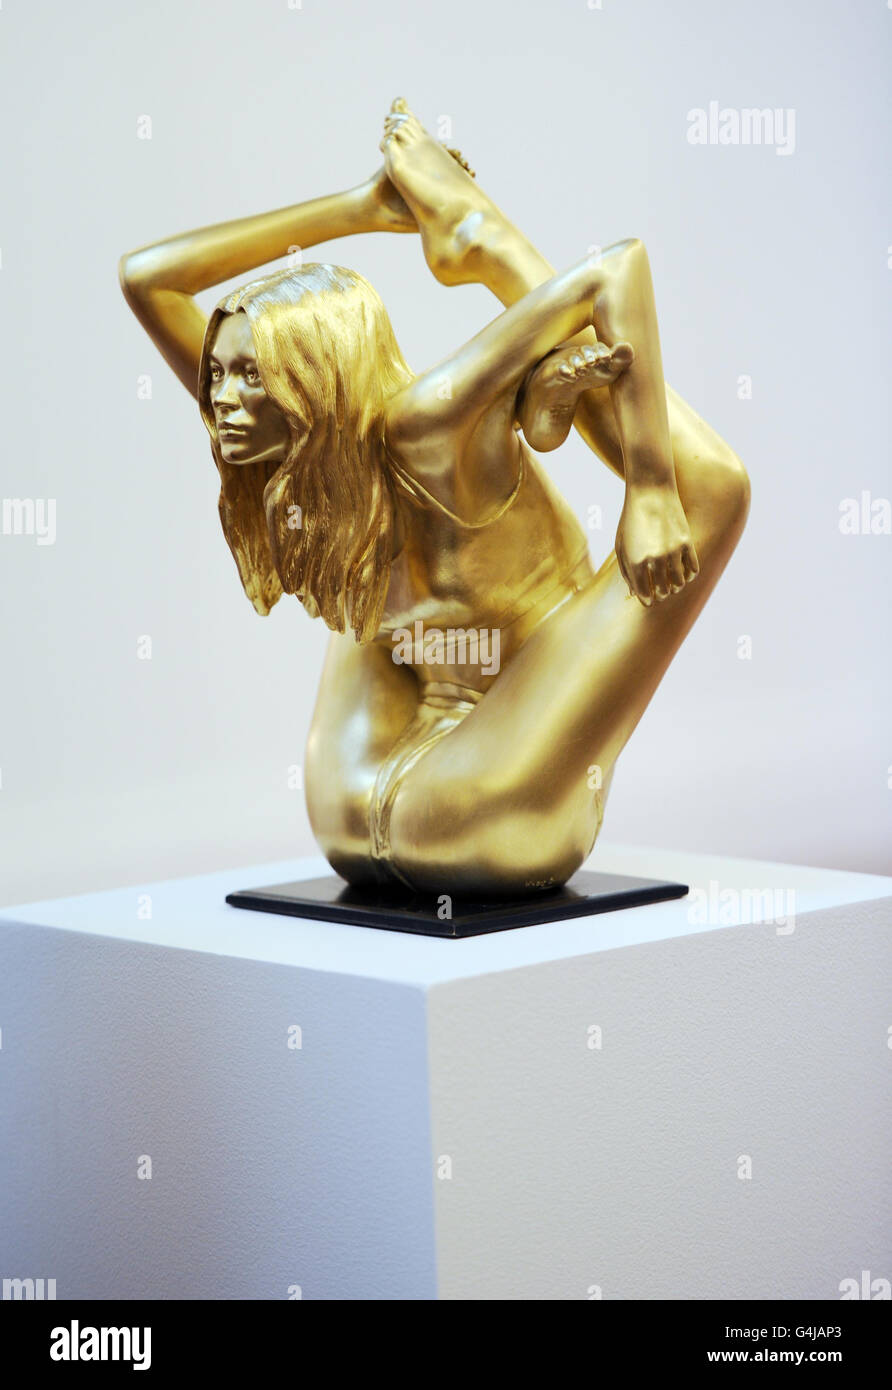 A sculpture of Kate Moss in a yoga pose entitled 'siren' by Marc Quinn, on display at Sotheby's London, as part of their upcoming salesof Impressionist, Modern, Contemporary and 20th Century Italian Art. Stock Photo